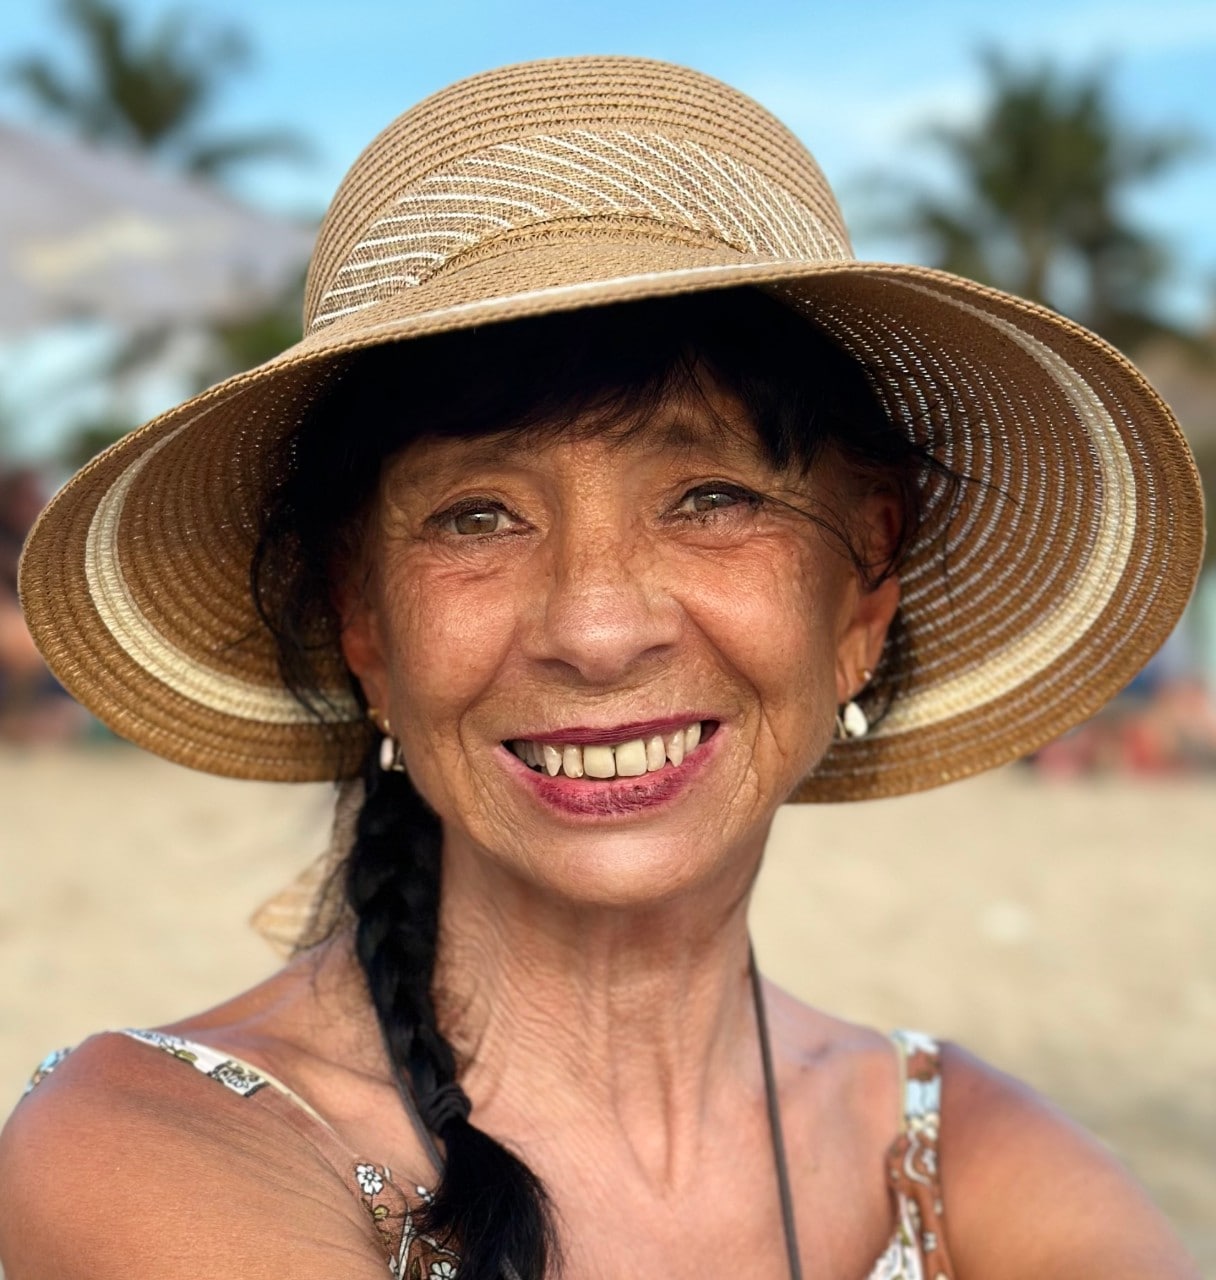 photo of indigenous woman smiling, wearing a sun hat